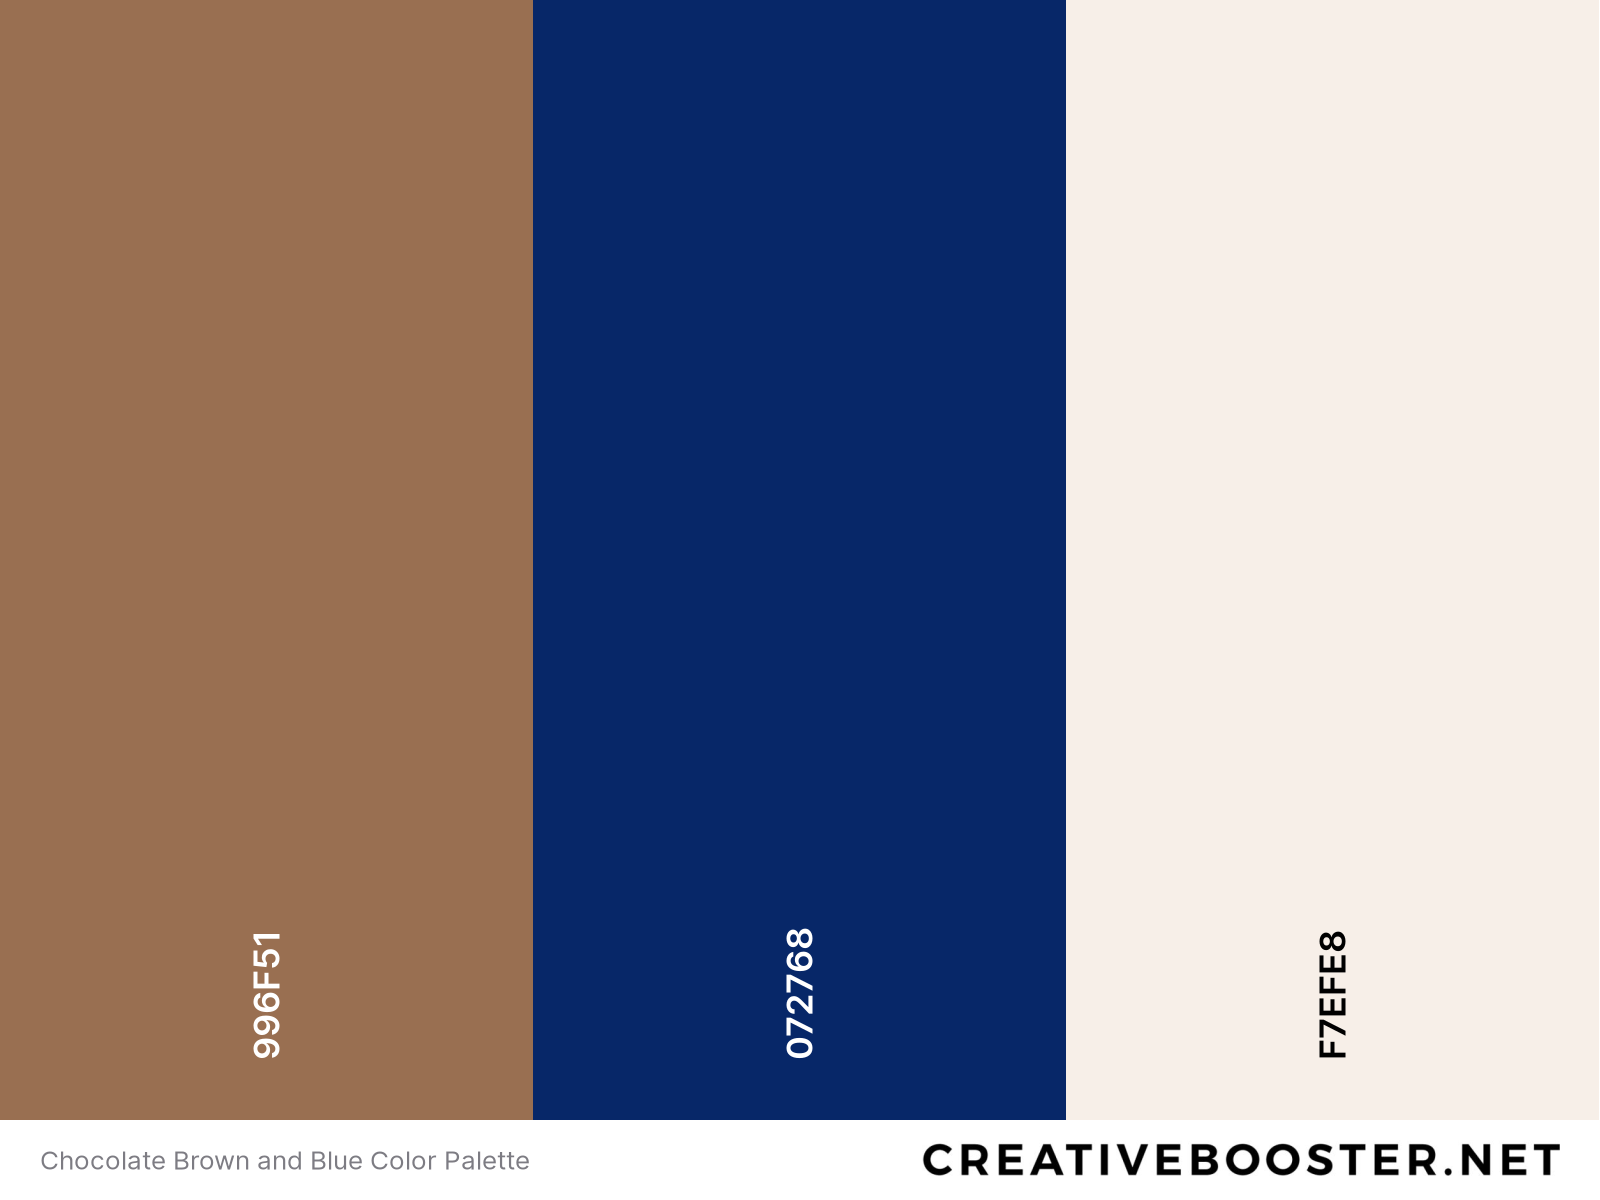 Chocolate Brown and Blue Color Palette